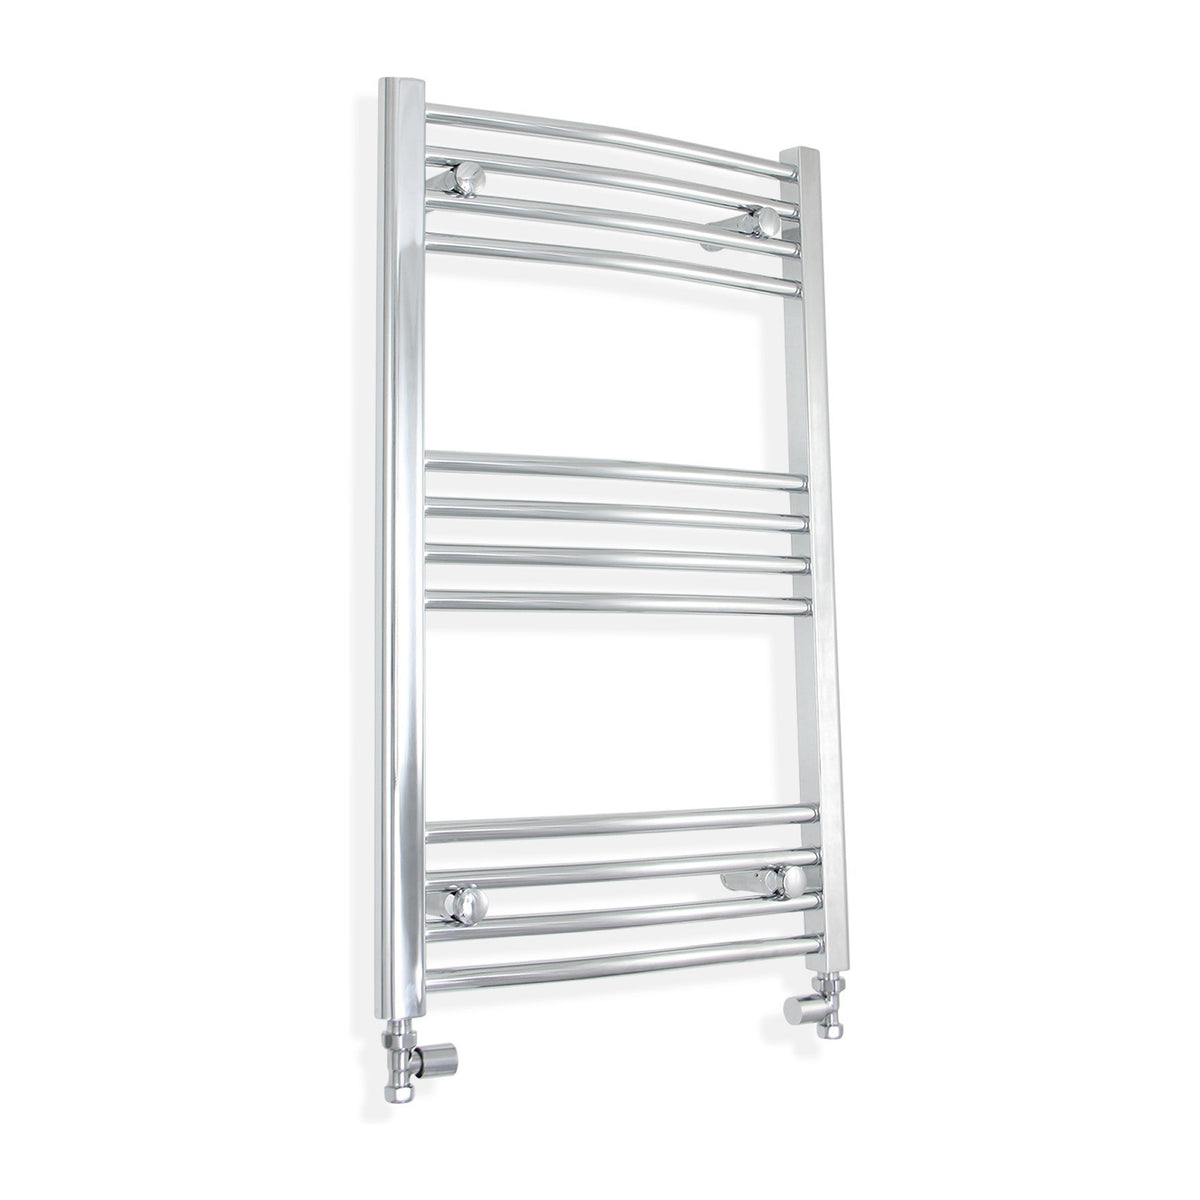 600mm Wide 800mm High Curved Chrome Towel Rail Radiator With Straight Valve